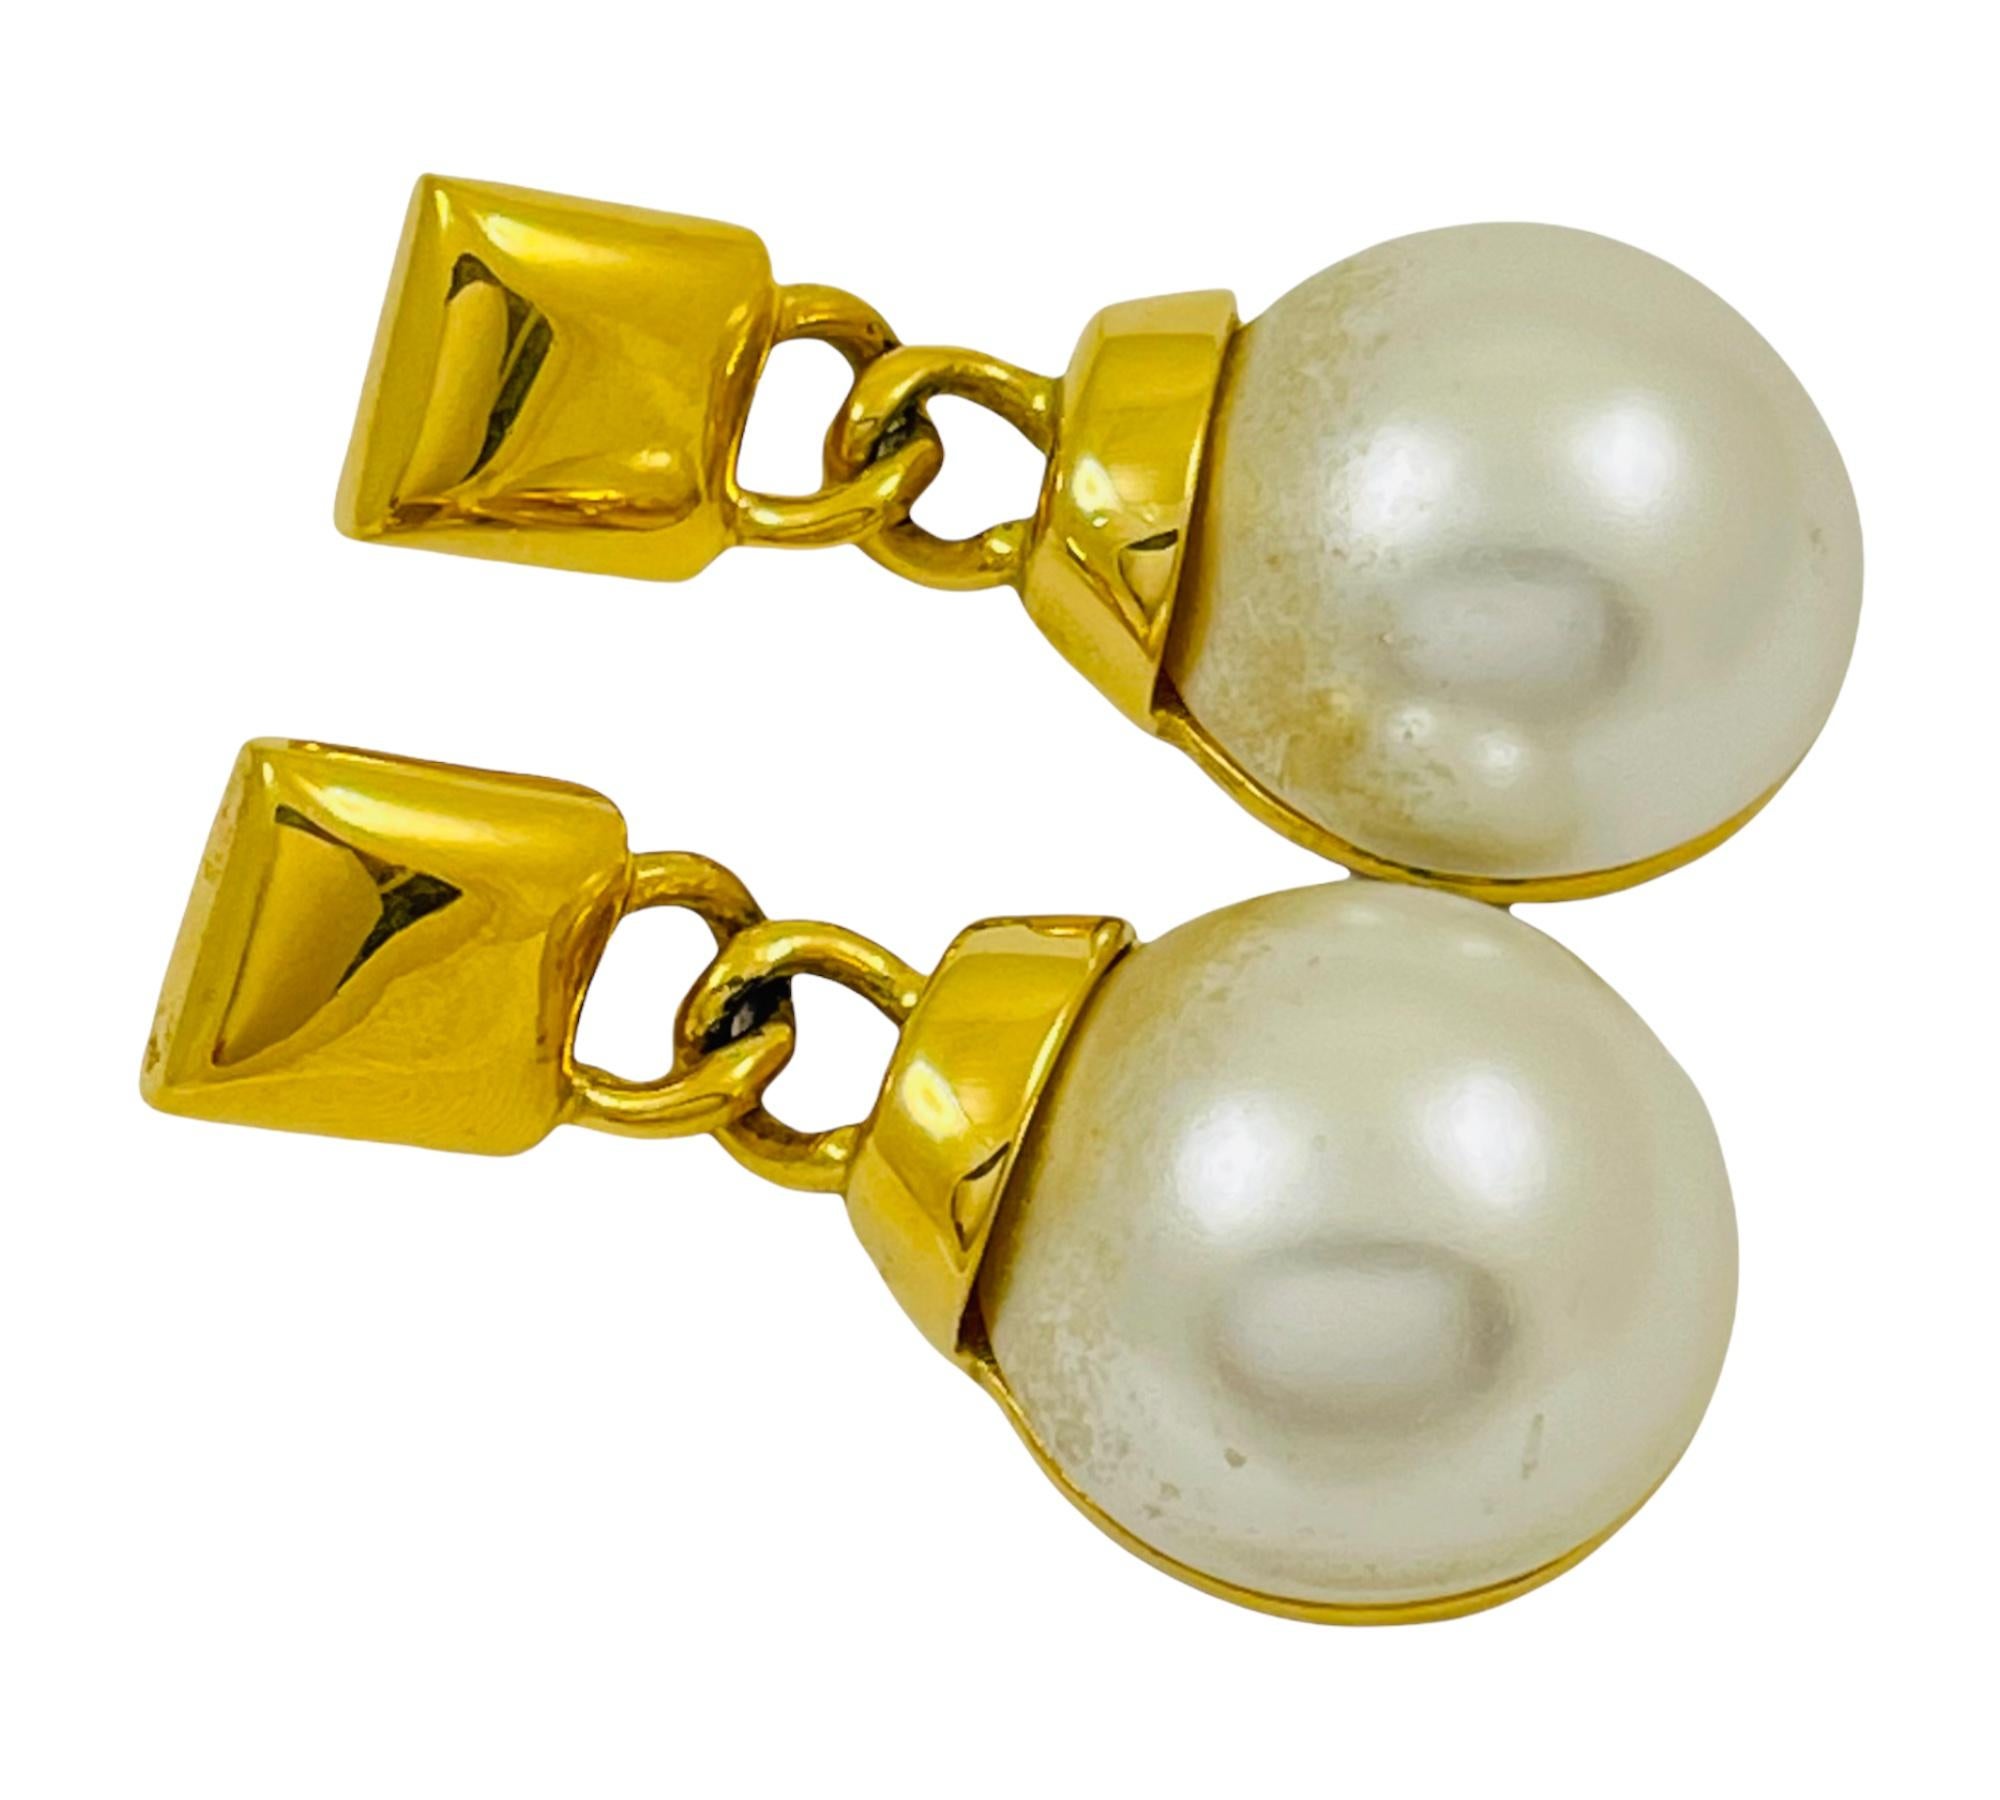 DETAILS

• signed NAPIER

• gold tone with pearl cabochon

• pierced dangle designer runway earrings

MEASUREMENTS  

• 1.88” by 0.88”

CONDITION

• excellent vintage condition with minimal signs of wear   

❤️❤️ VINTAGE DESIGNER JEWELRY ❤️❤️ 